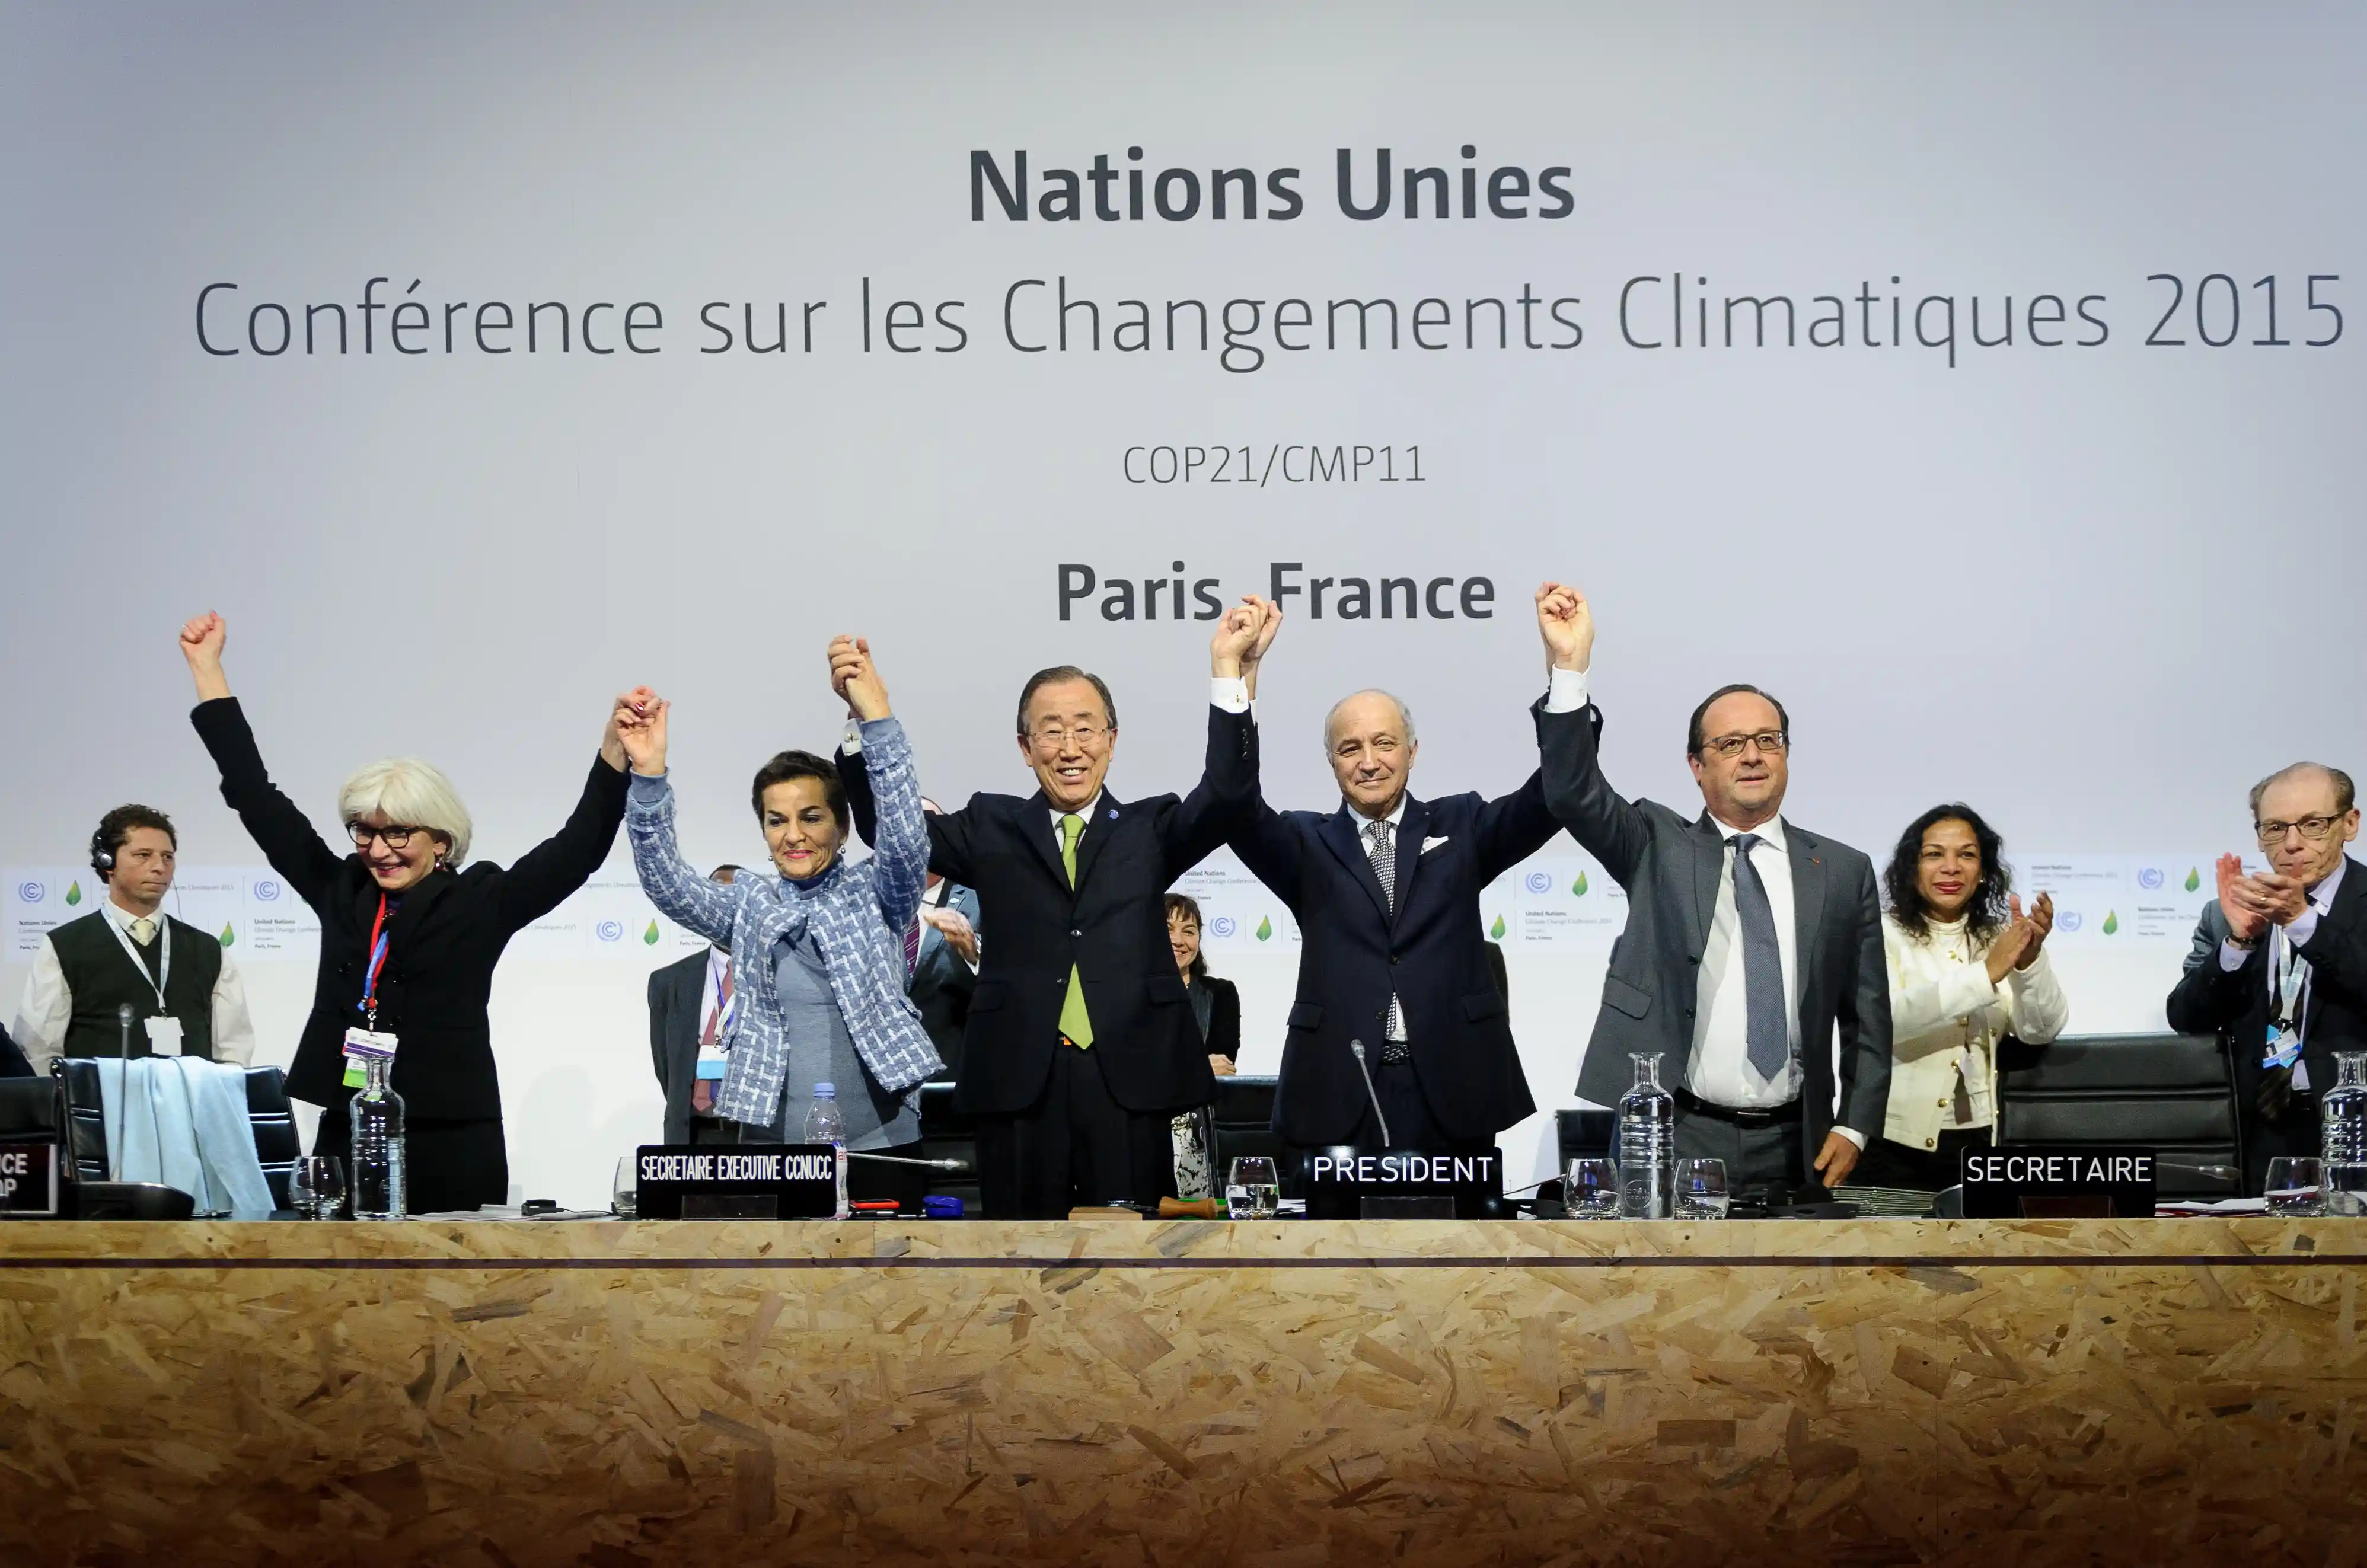 United Nations Climate Change Conference, COP21, in Paris, 2015